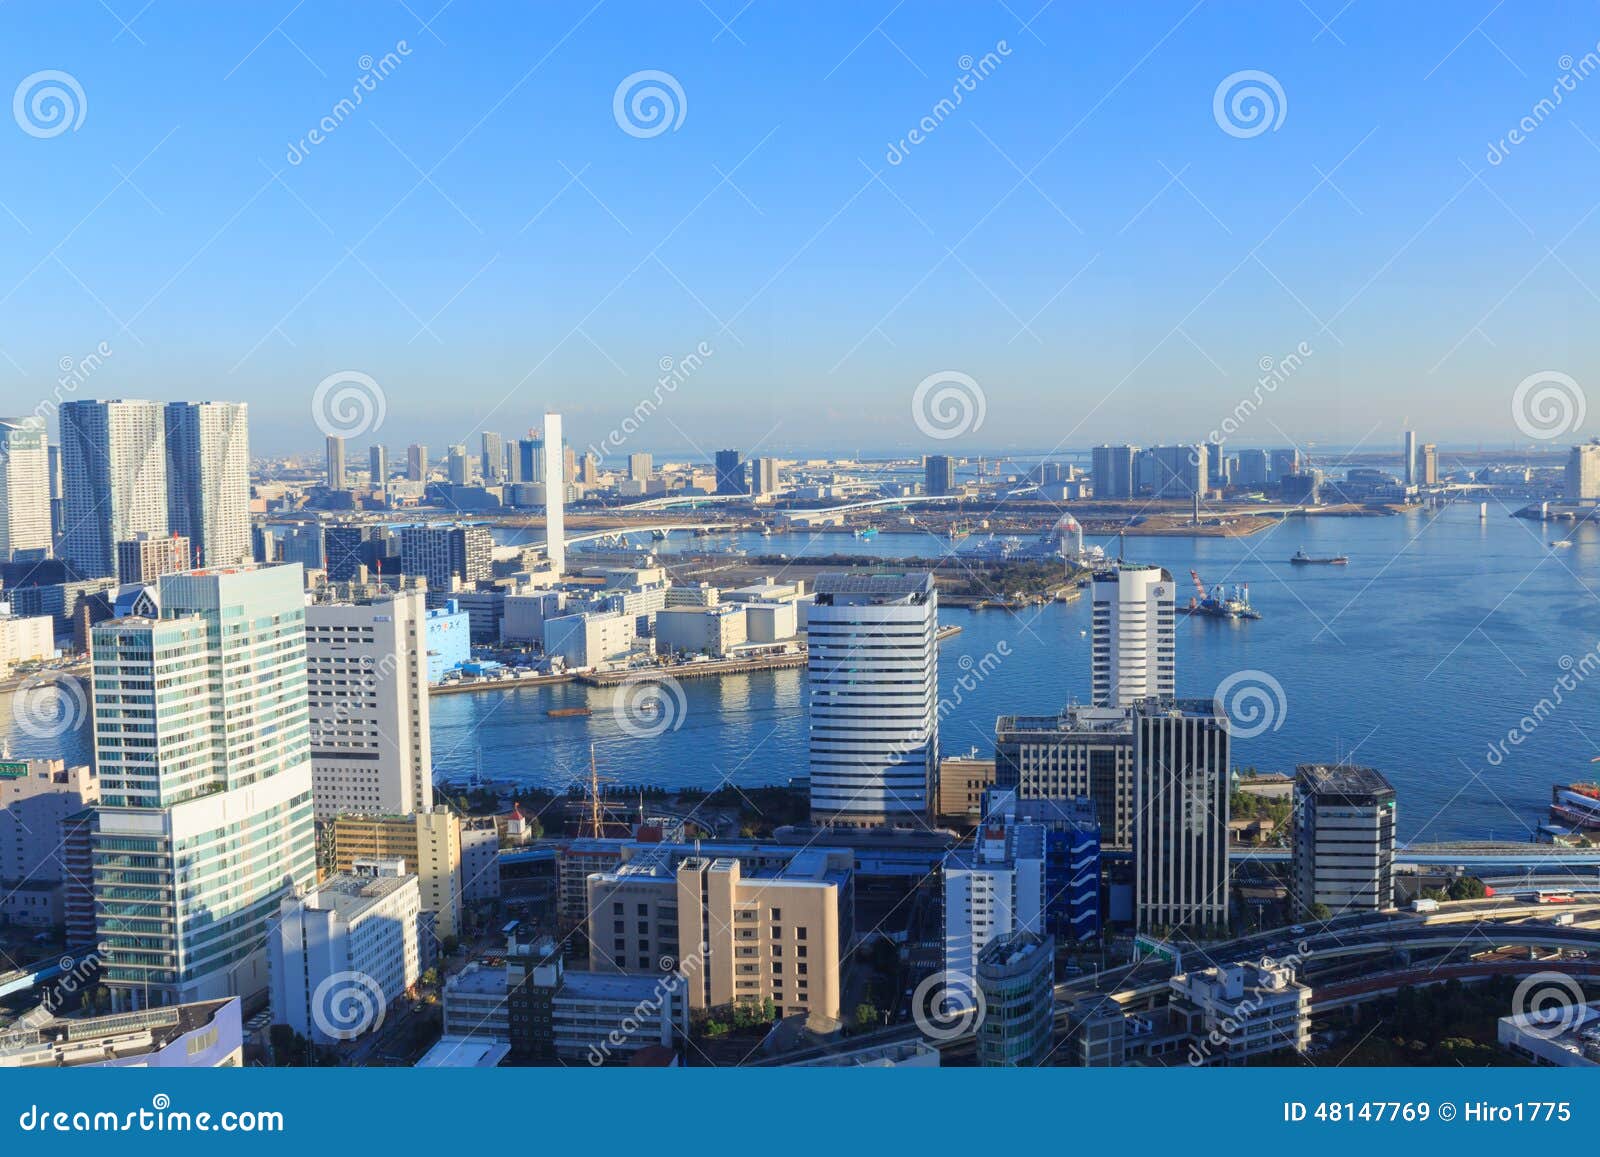 The City Of Tokyo Skyscraper At Tokyo Bay Area Editorial Stock Image Image Of Buildings Business